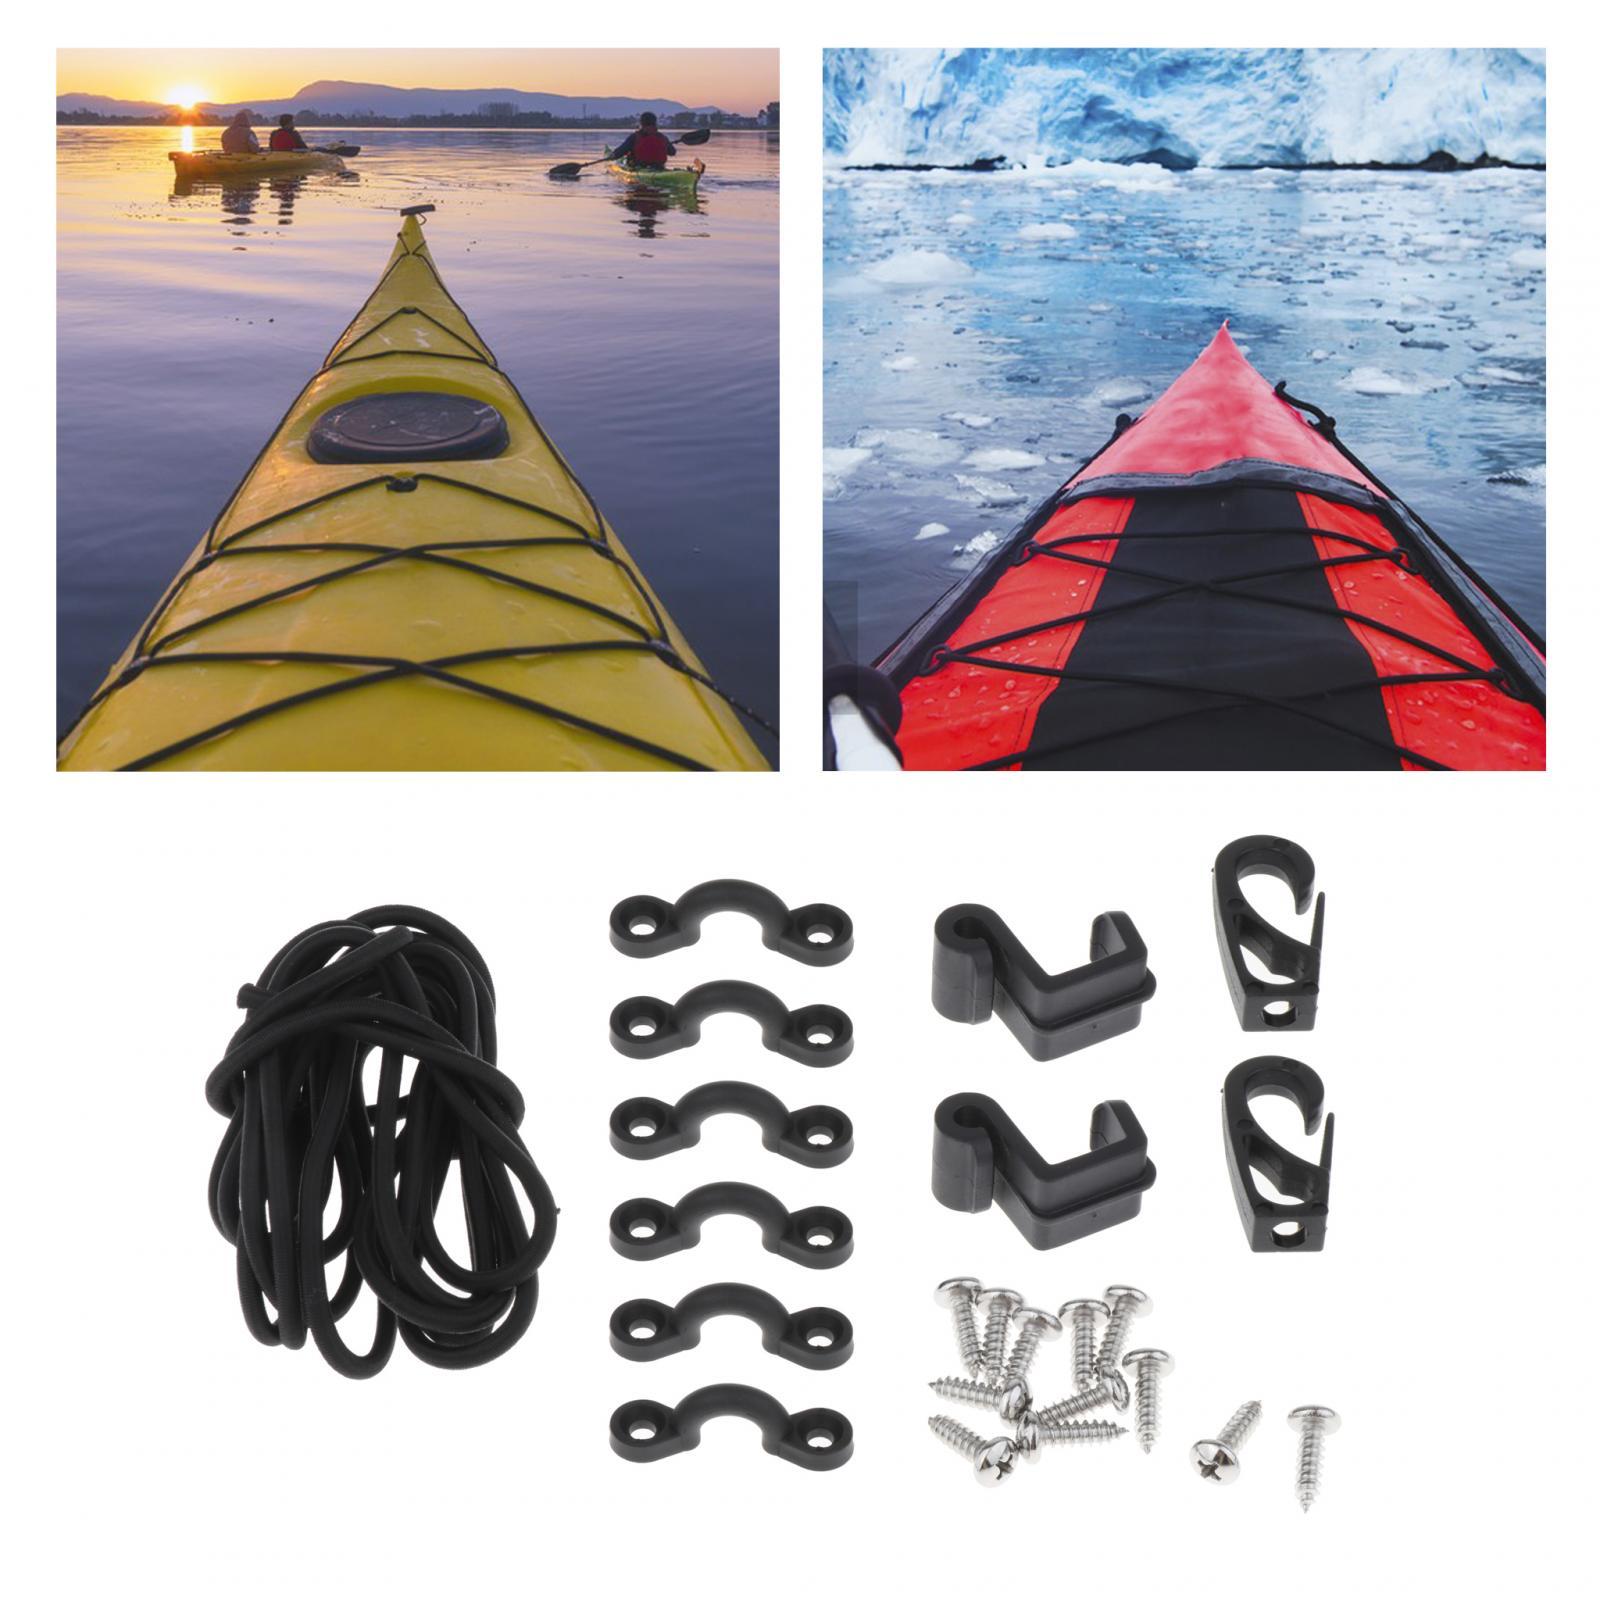 Deck Rigging Set Accessory Fishing Storage Bungee Set with Bungee Cord Hooks